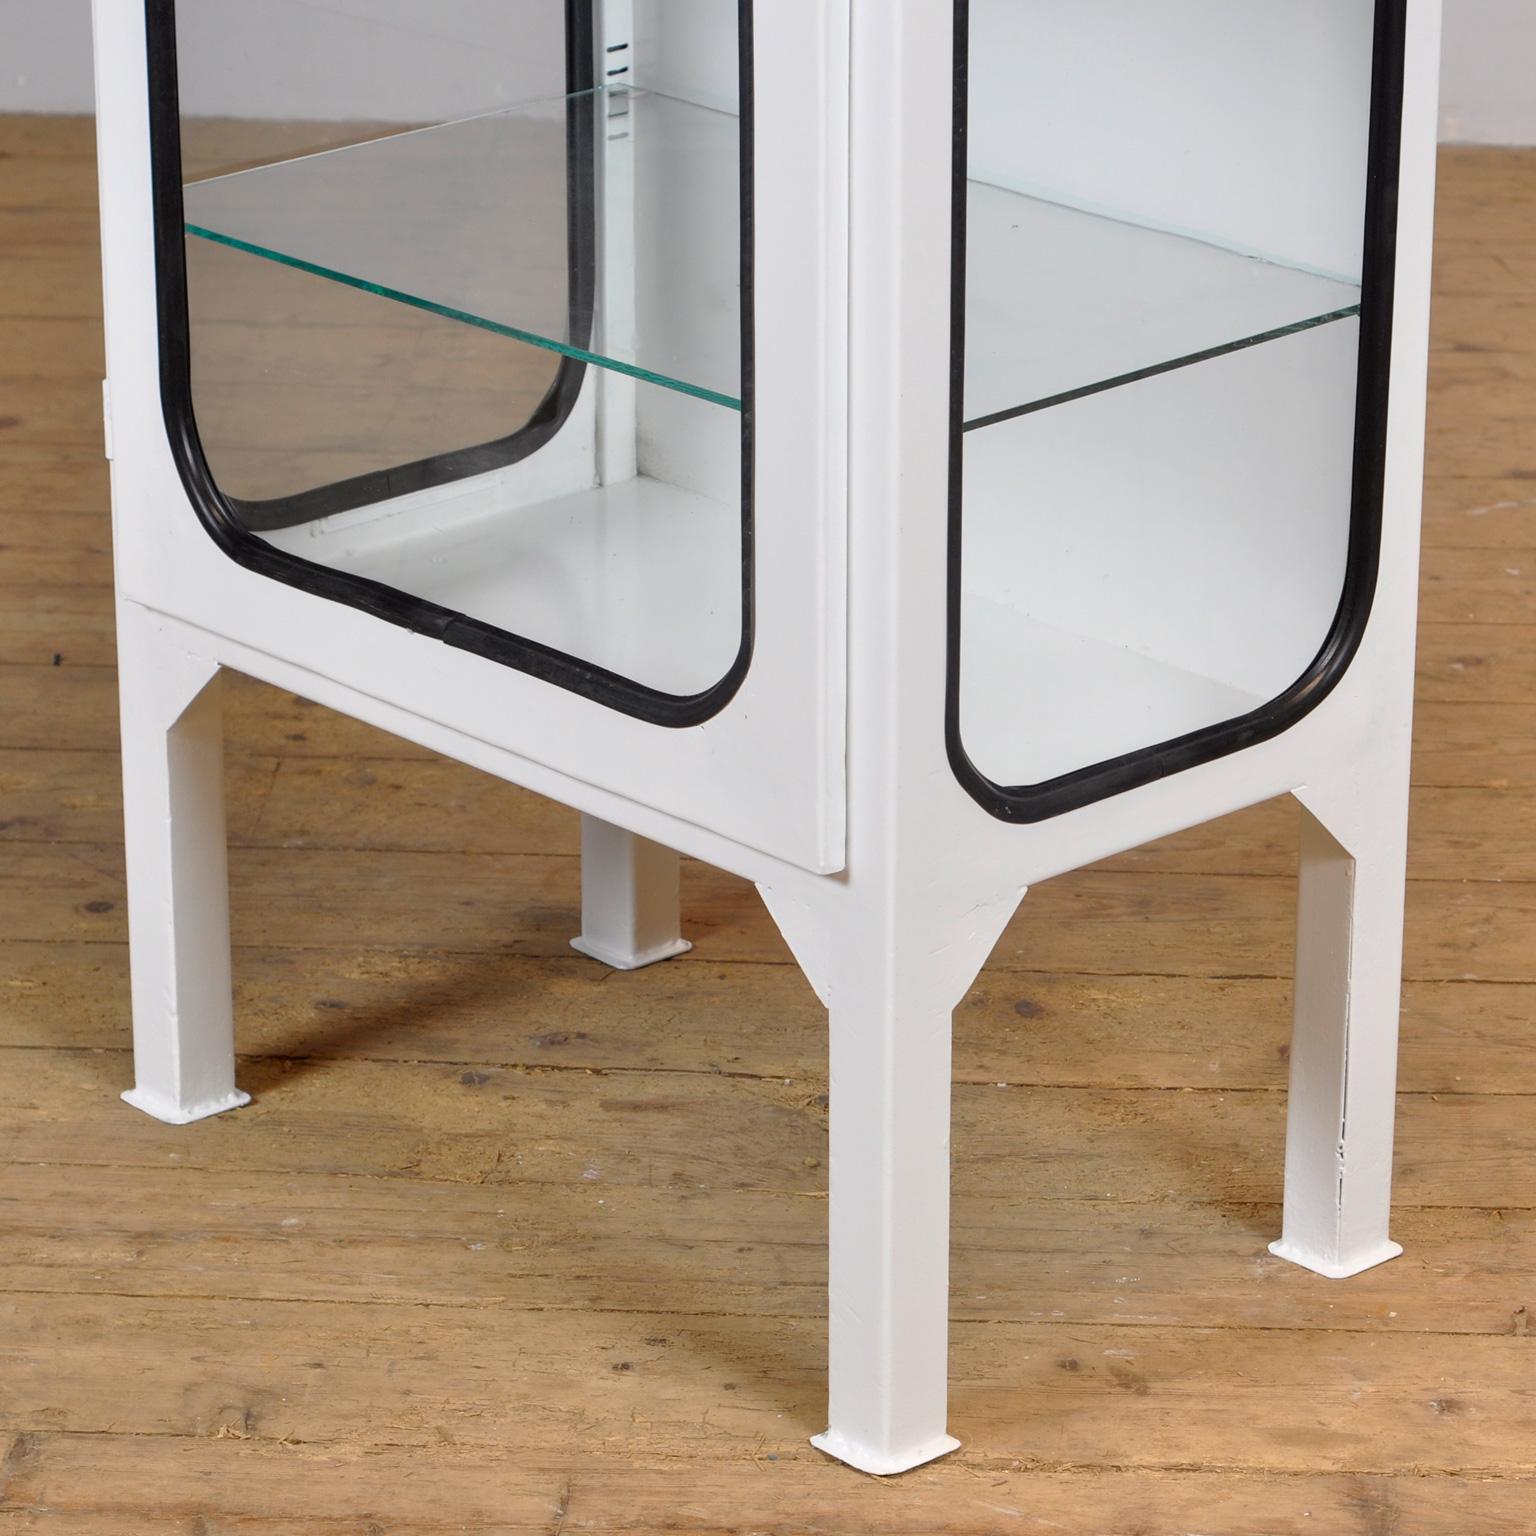 Late 20th Century Restored Vintage Iron And Glass Medical Cabinet, 1970s For Sale